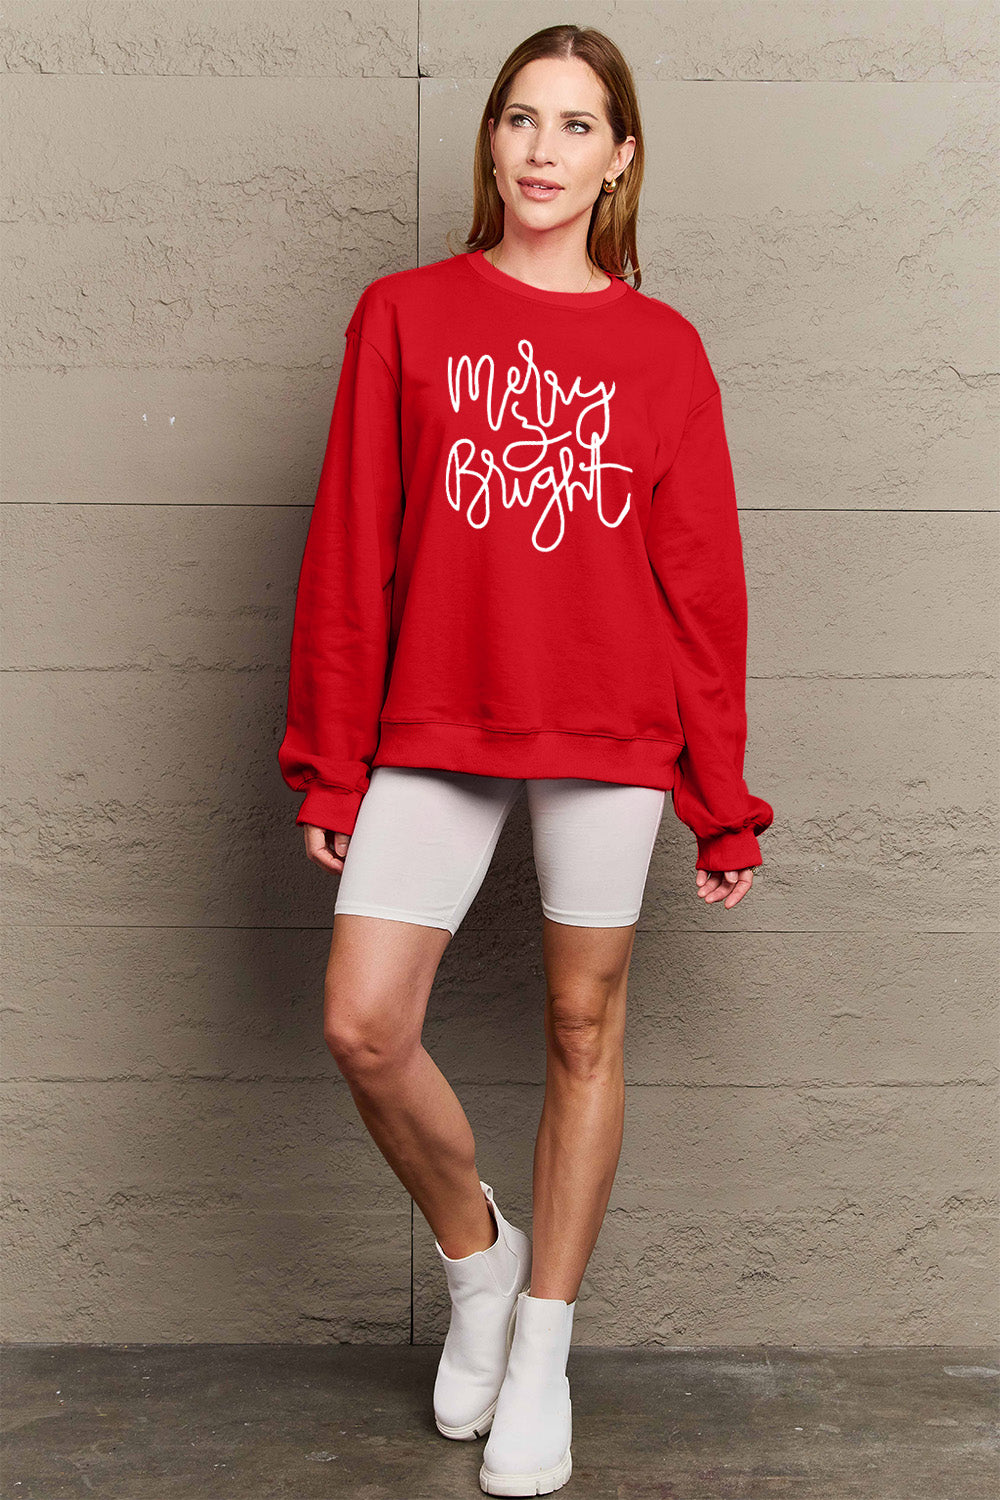 MERRY AND BRIGHT Graphic Sweatshirt - 3 Colors